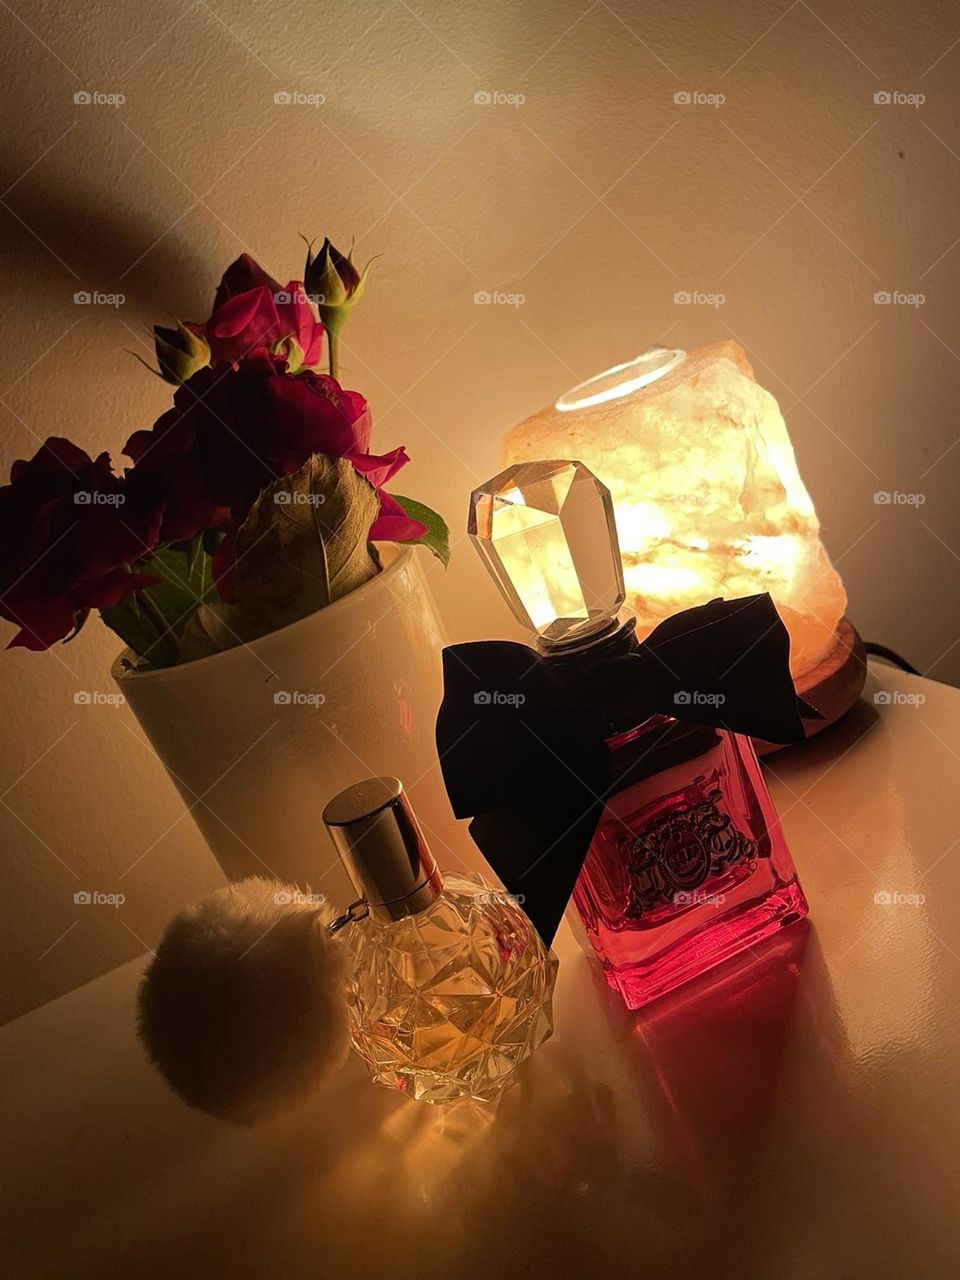 Perfumes are my beauty products